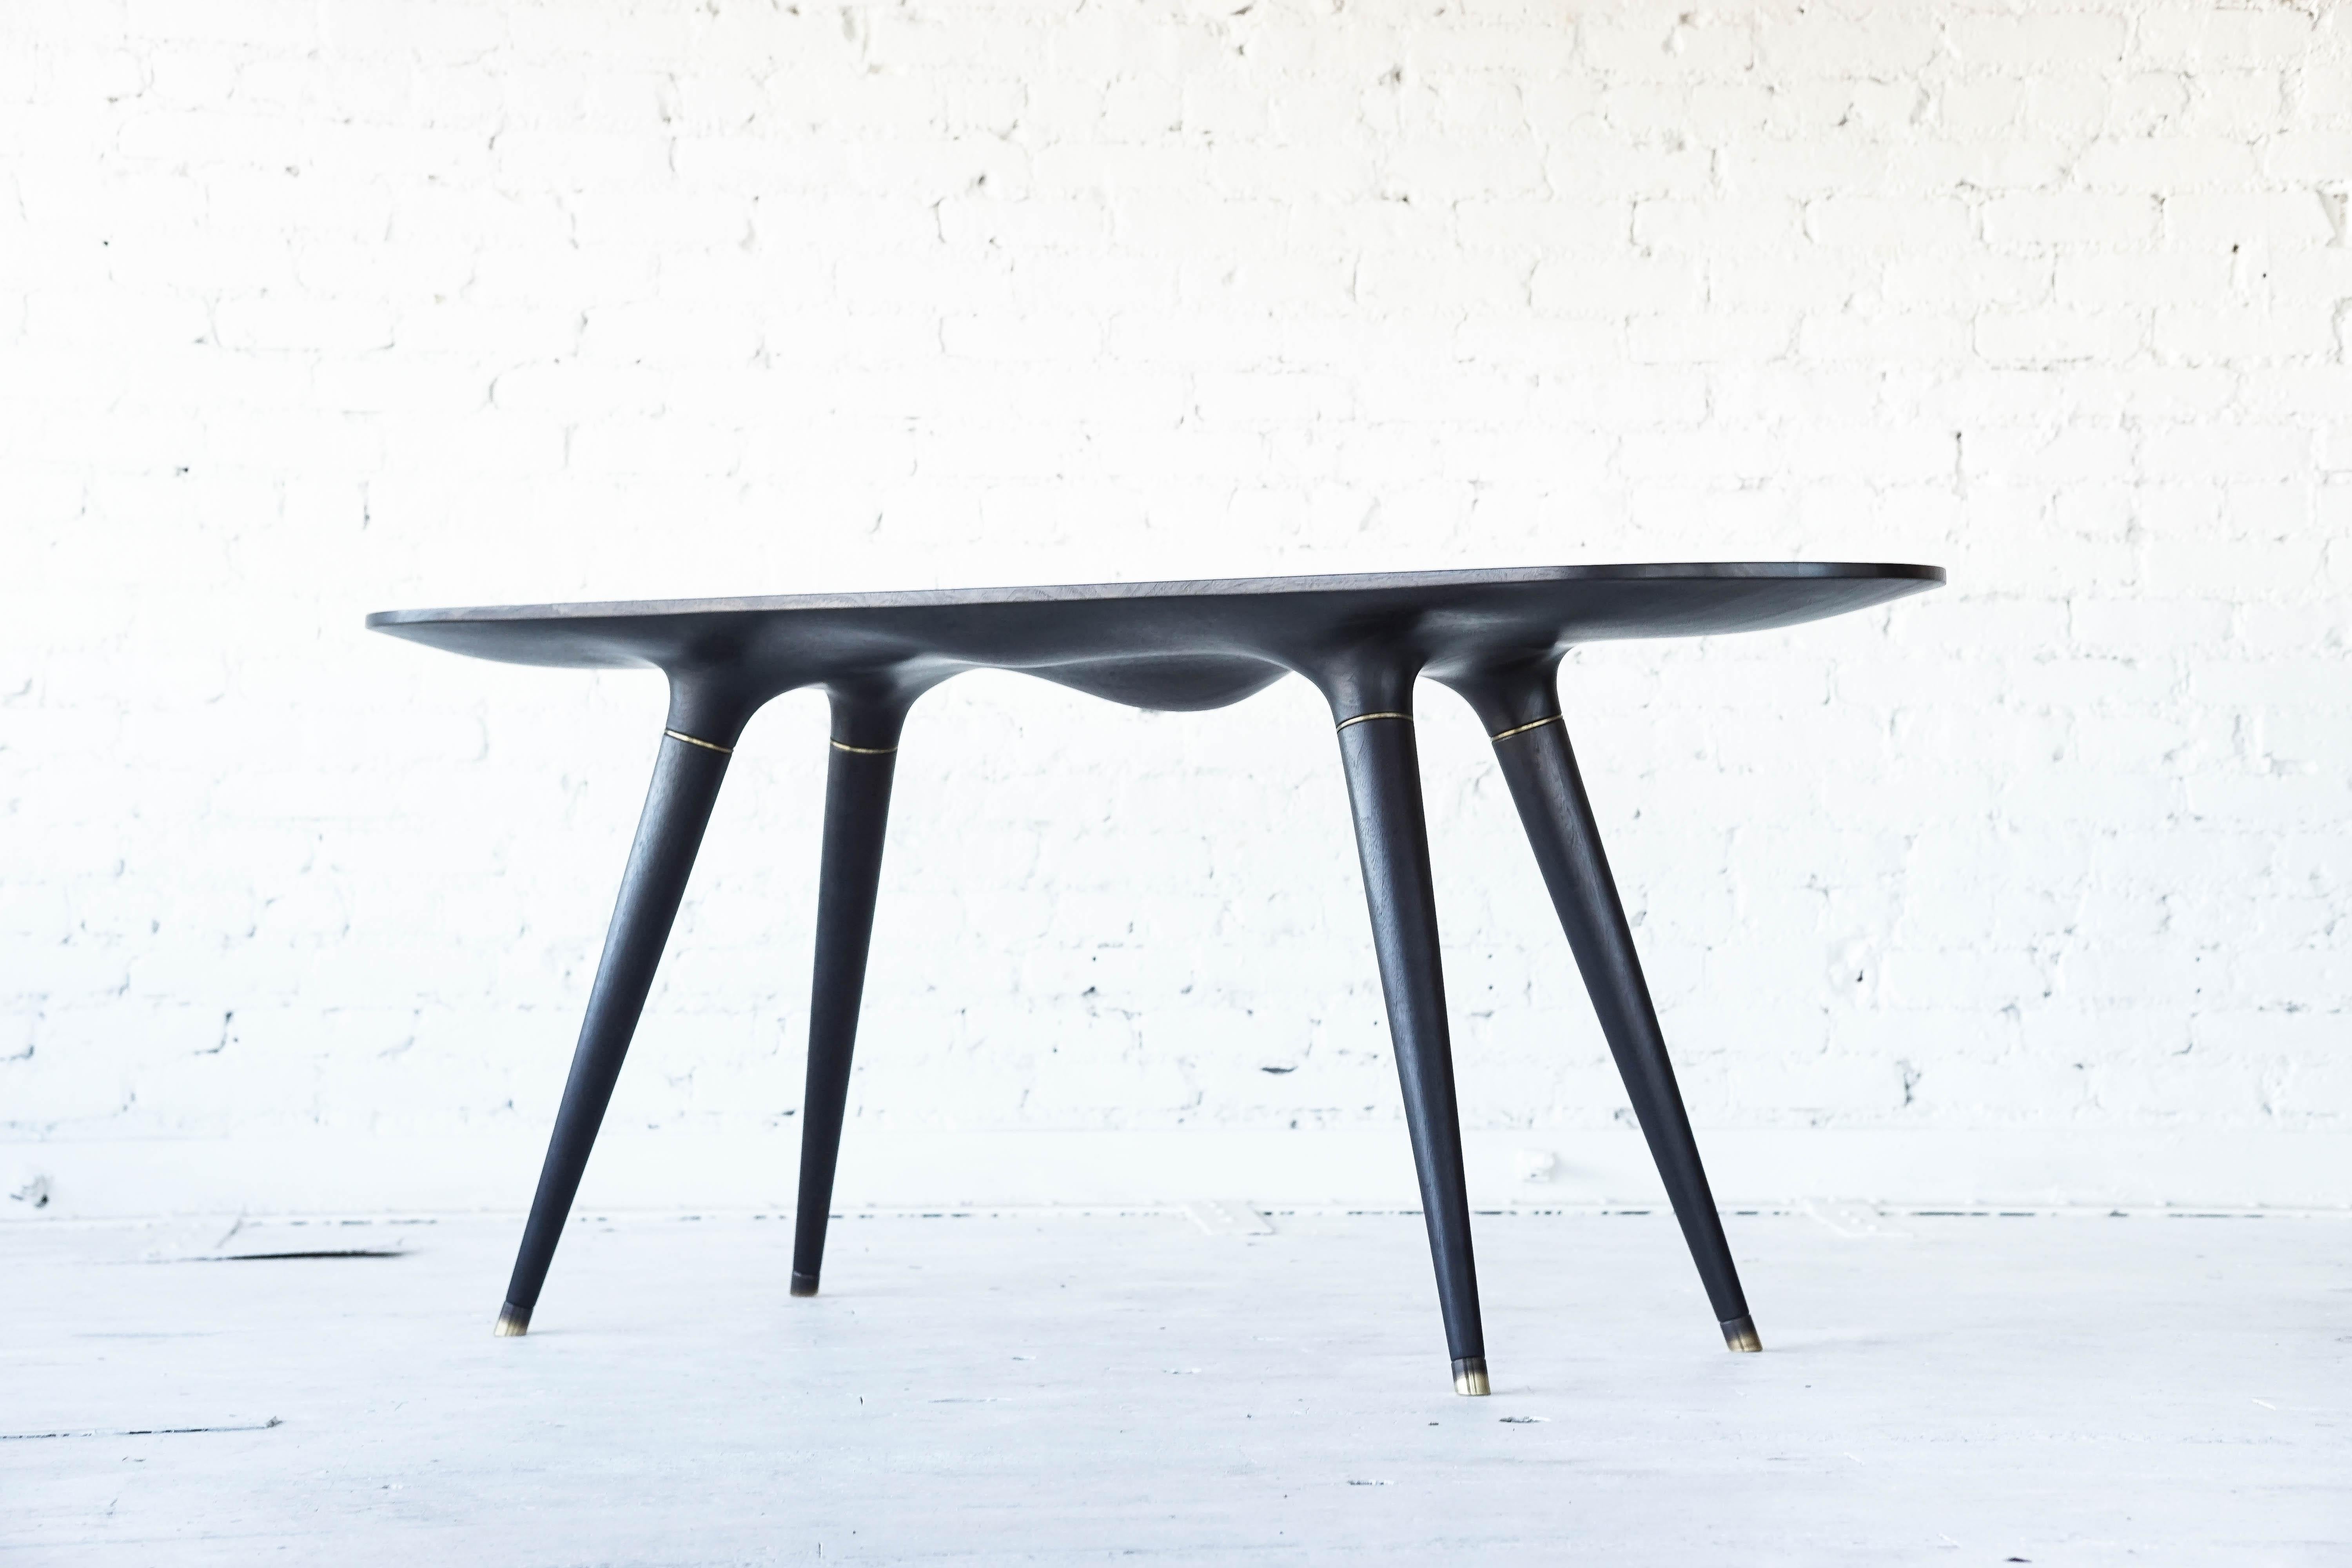 Ebonized dining table 001 from Series001 by Vincent Pocsik.

Vincent Pocsik finds the balance between old and new fabrication techniques working in conjunction to find an anatomical form that creates its own presence. Series 001 is about finding